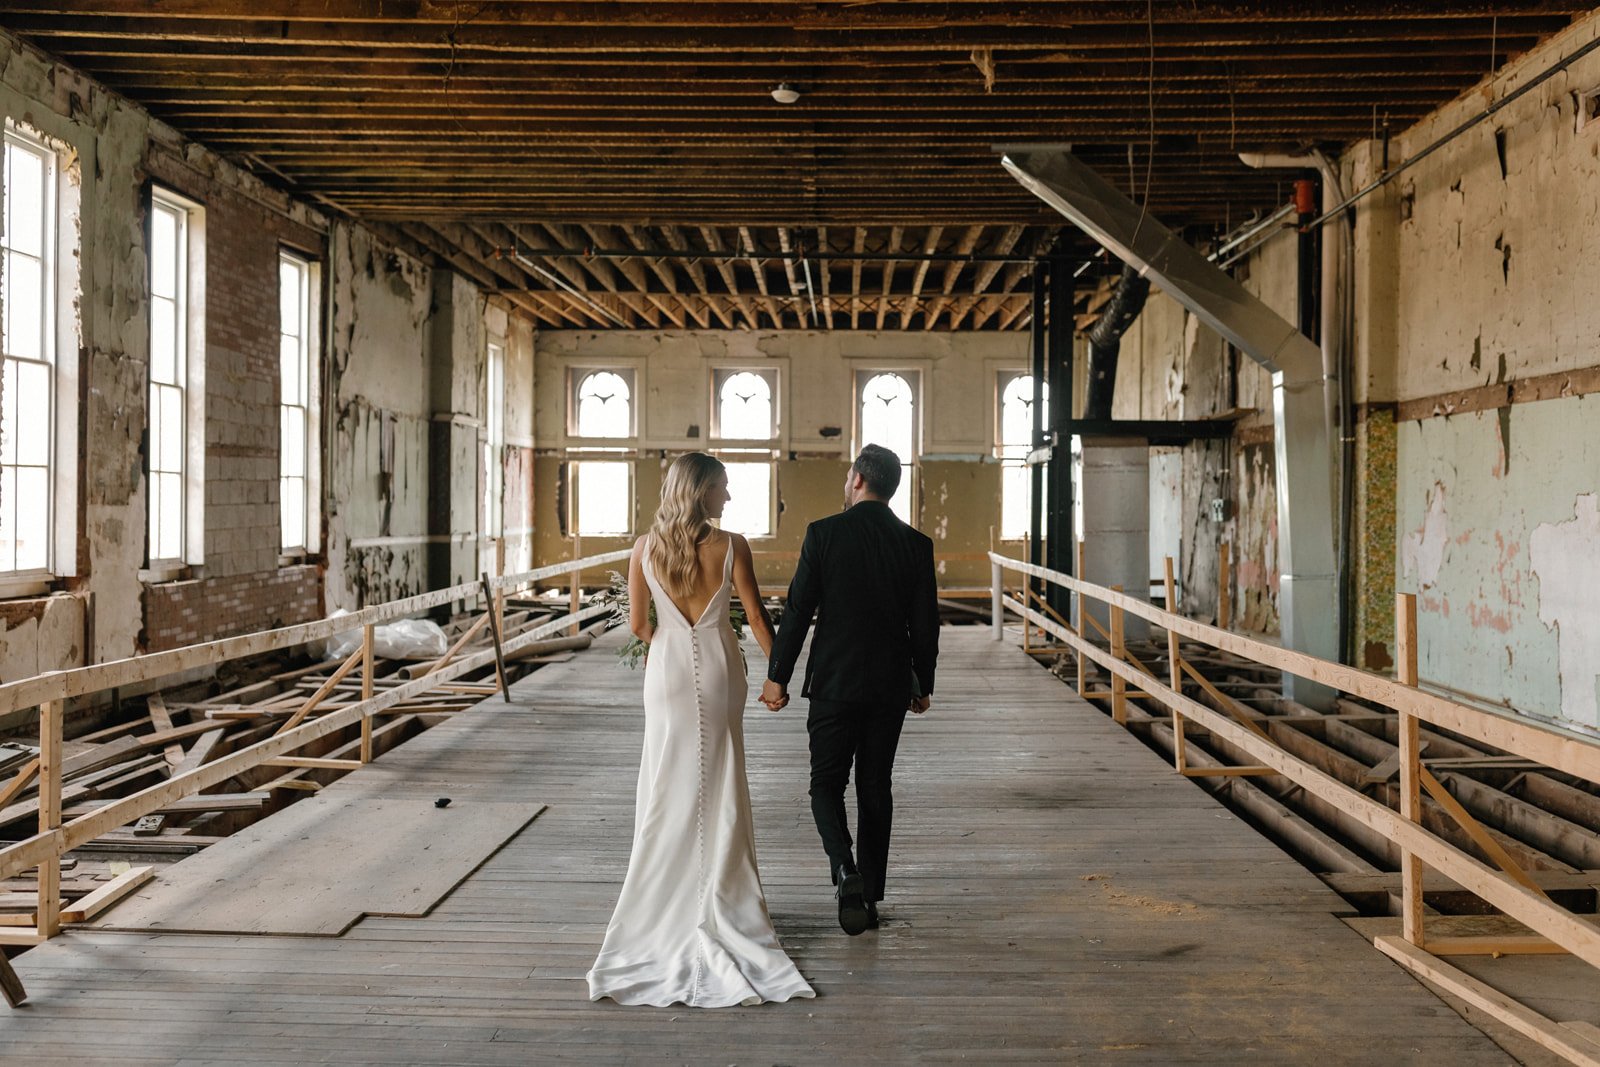 Bride and groom walking in unfinished antique historic room with large windows